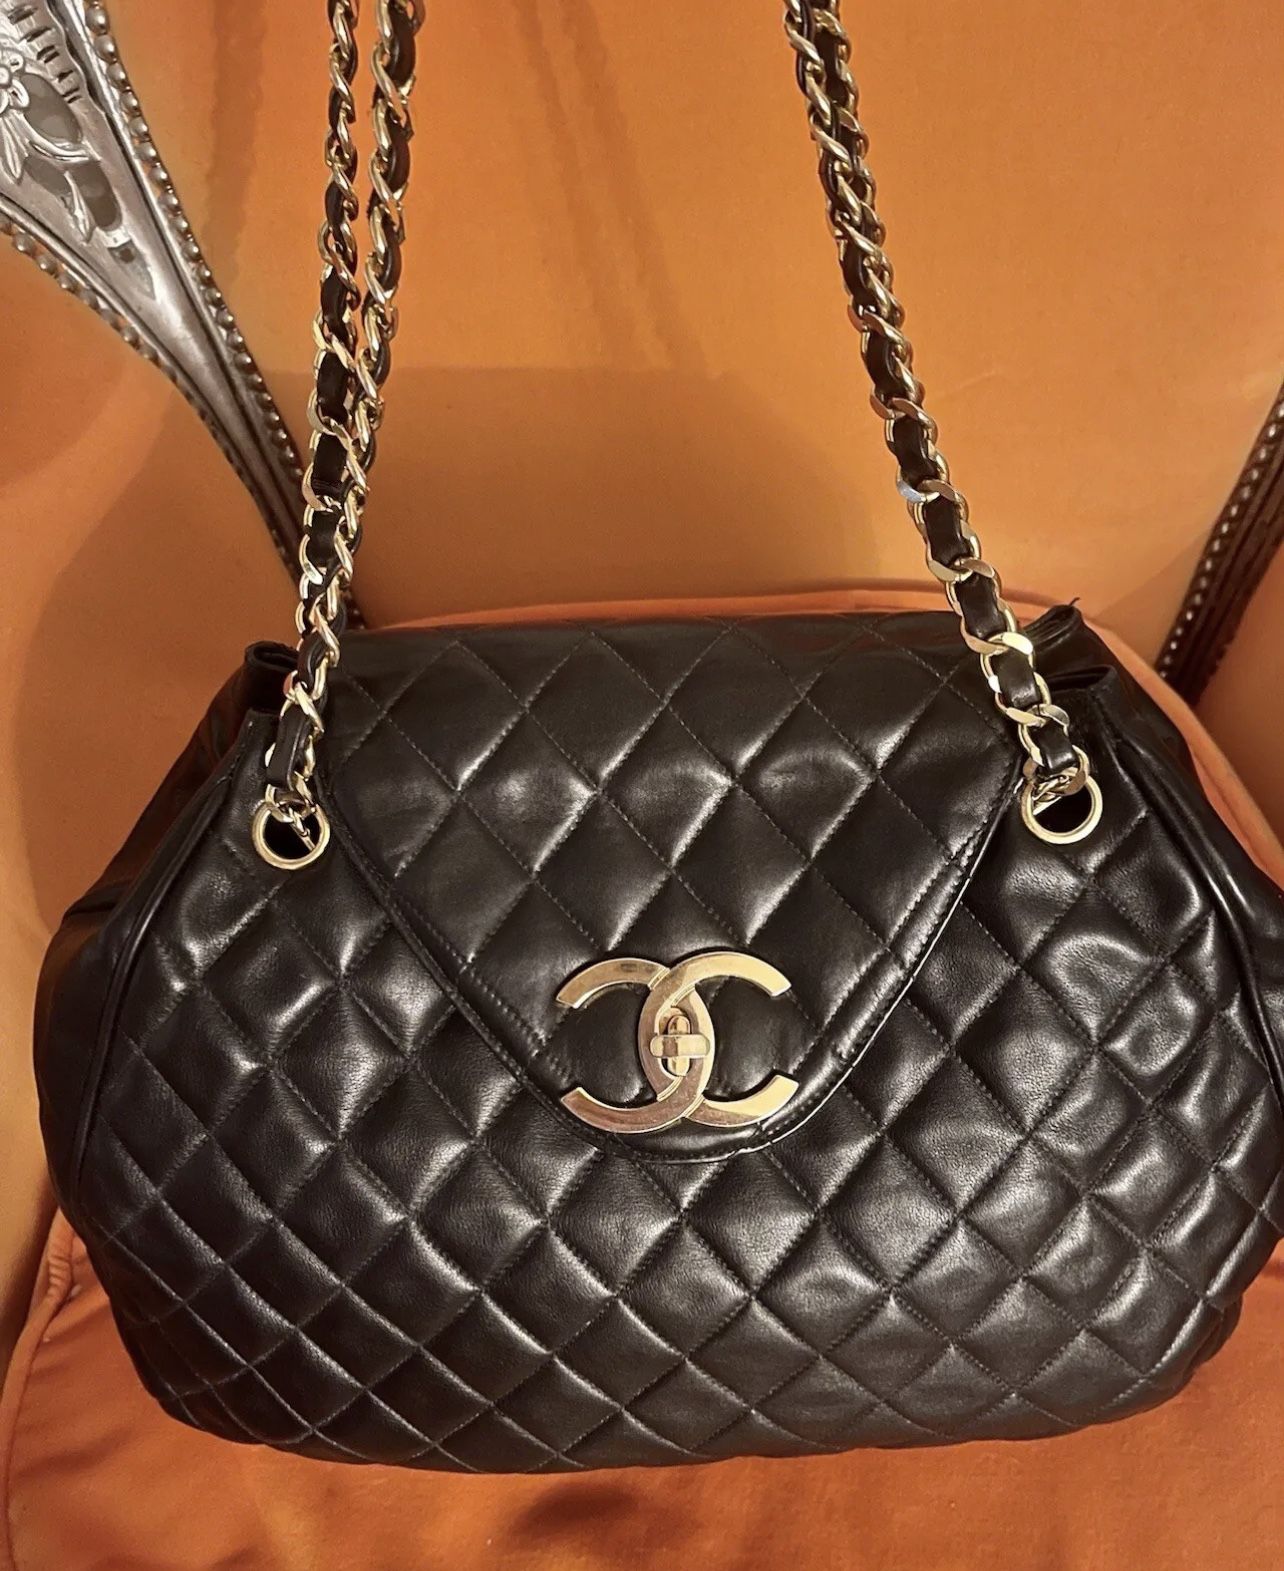 Auth CHANEL Jumbo Maxi Black Flap Quilted Purse Handbag Chain Travel Bag Rare!!   This Beautiful CHANEL bag is very rare!! I haven’t seen one like thi